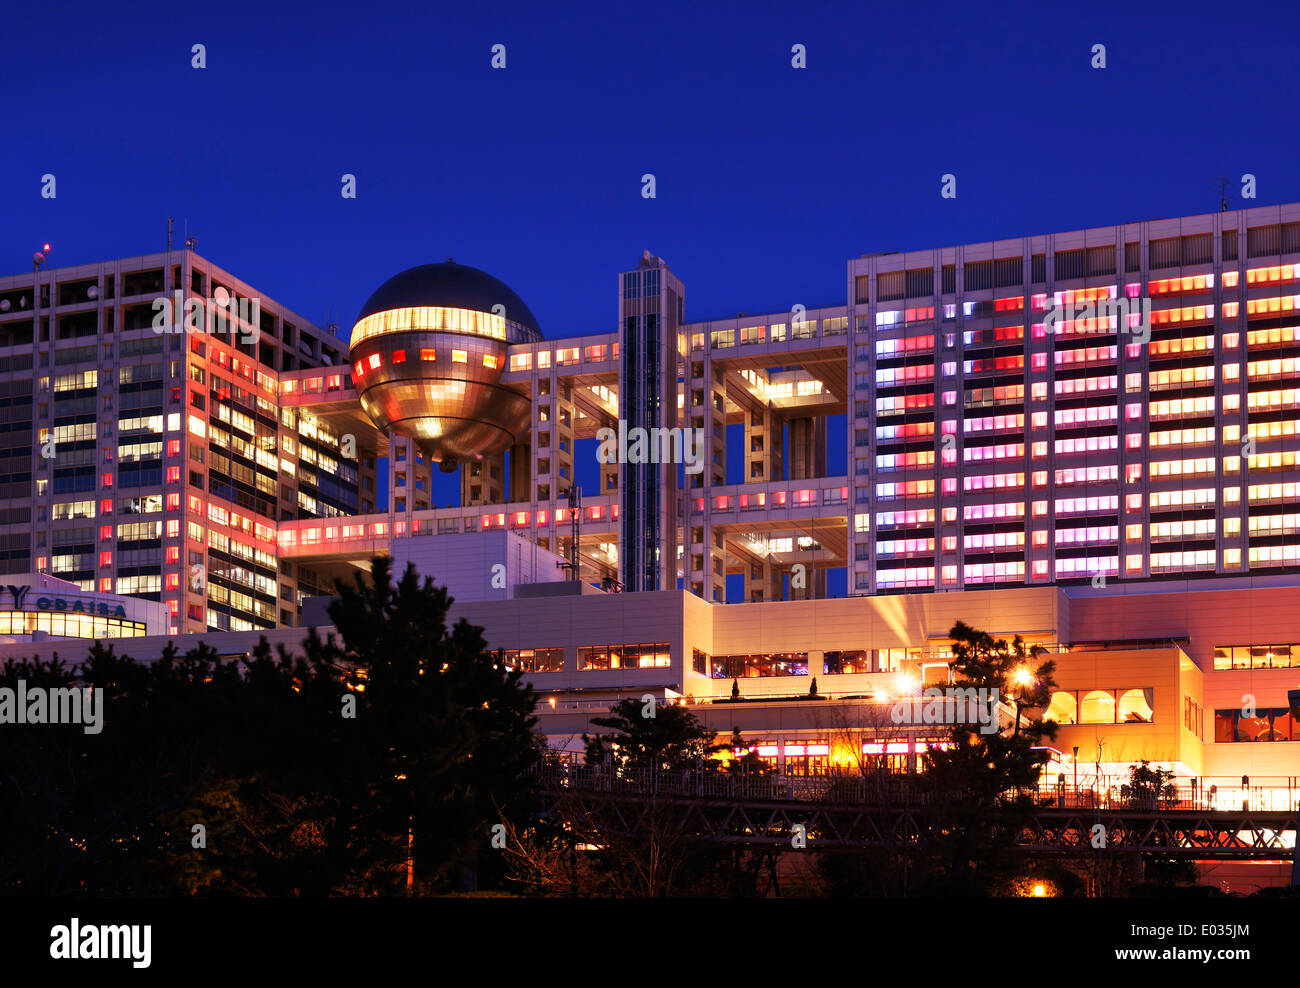 Fuji Television Headquaters building with colorful illumination at night in Odaiba, Tokyo, Japan Stock Photo